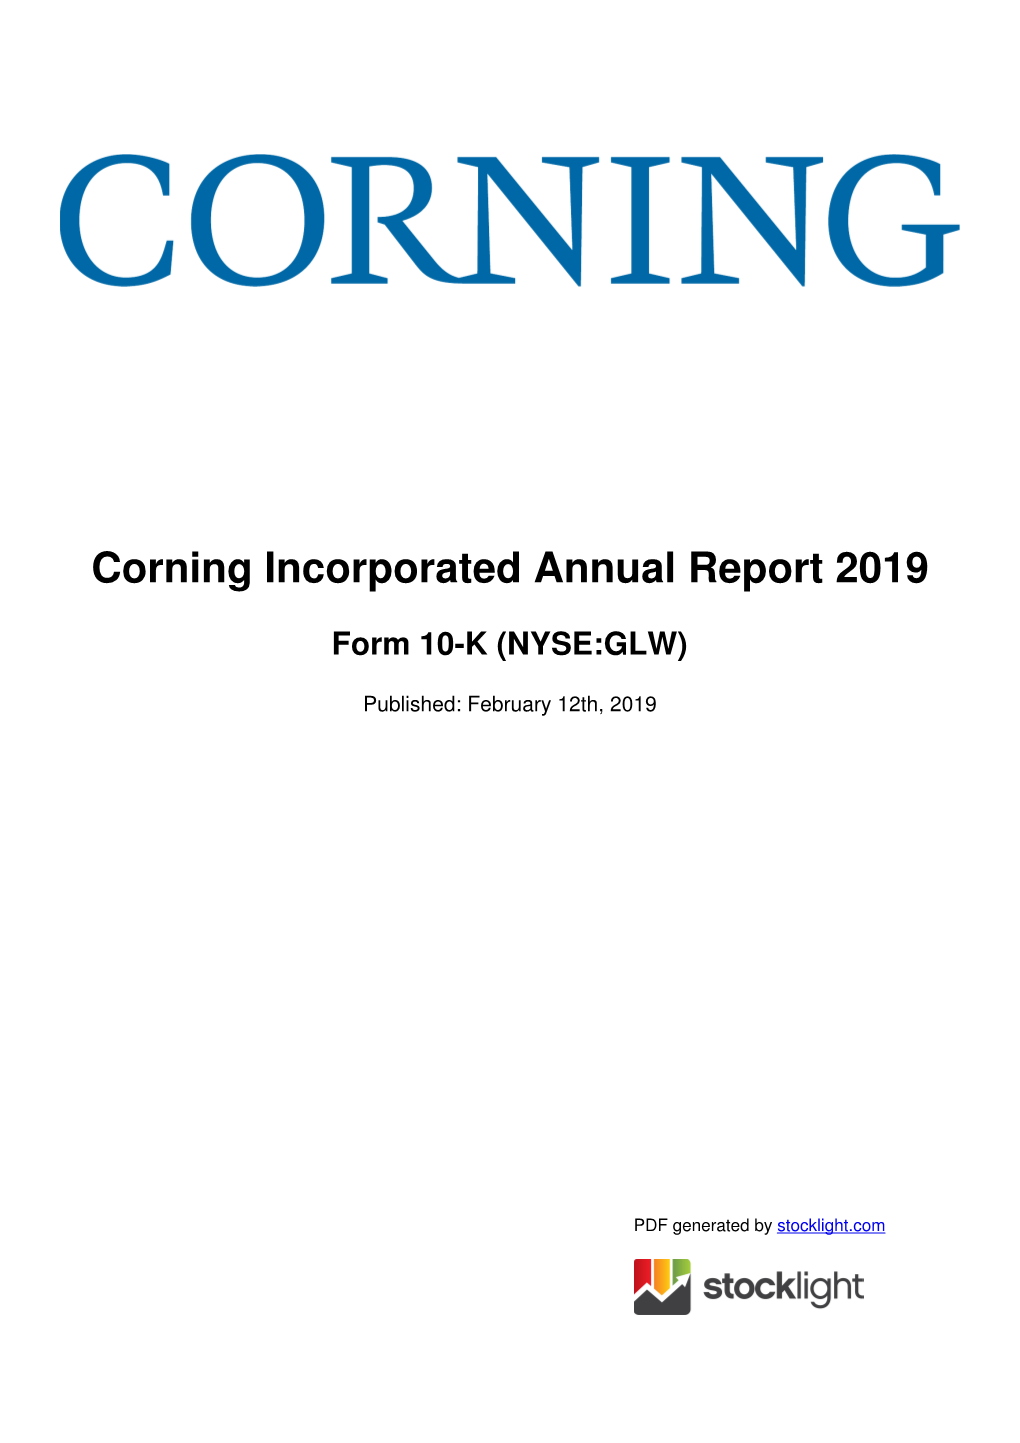 Corning Incorporated Annual Report 2019